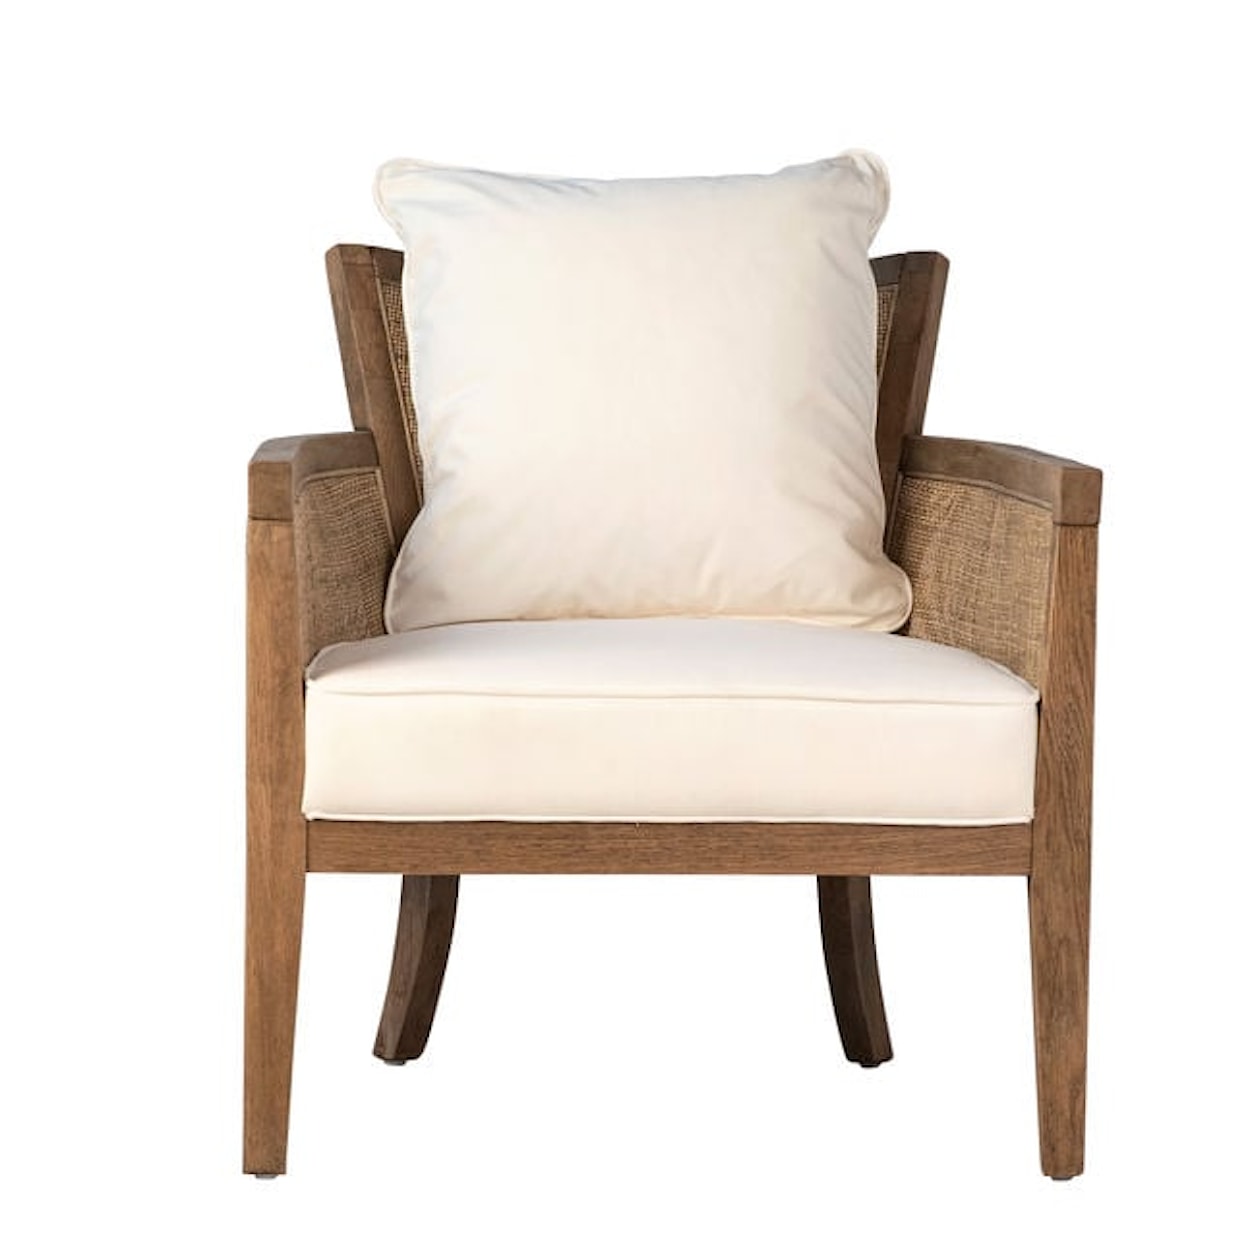 Dovetail Furniture Occasional Chairs Lily Occasional Chair